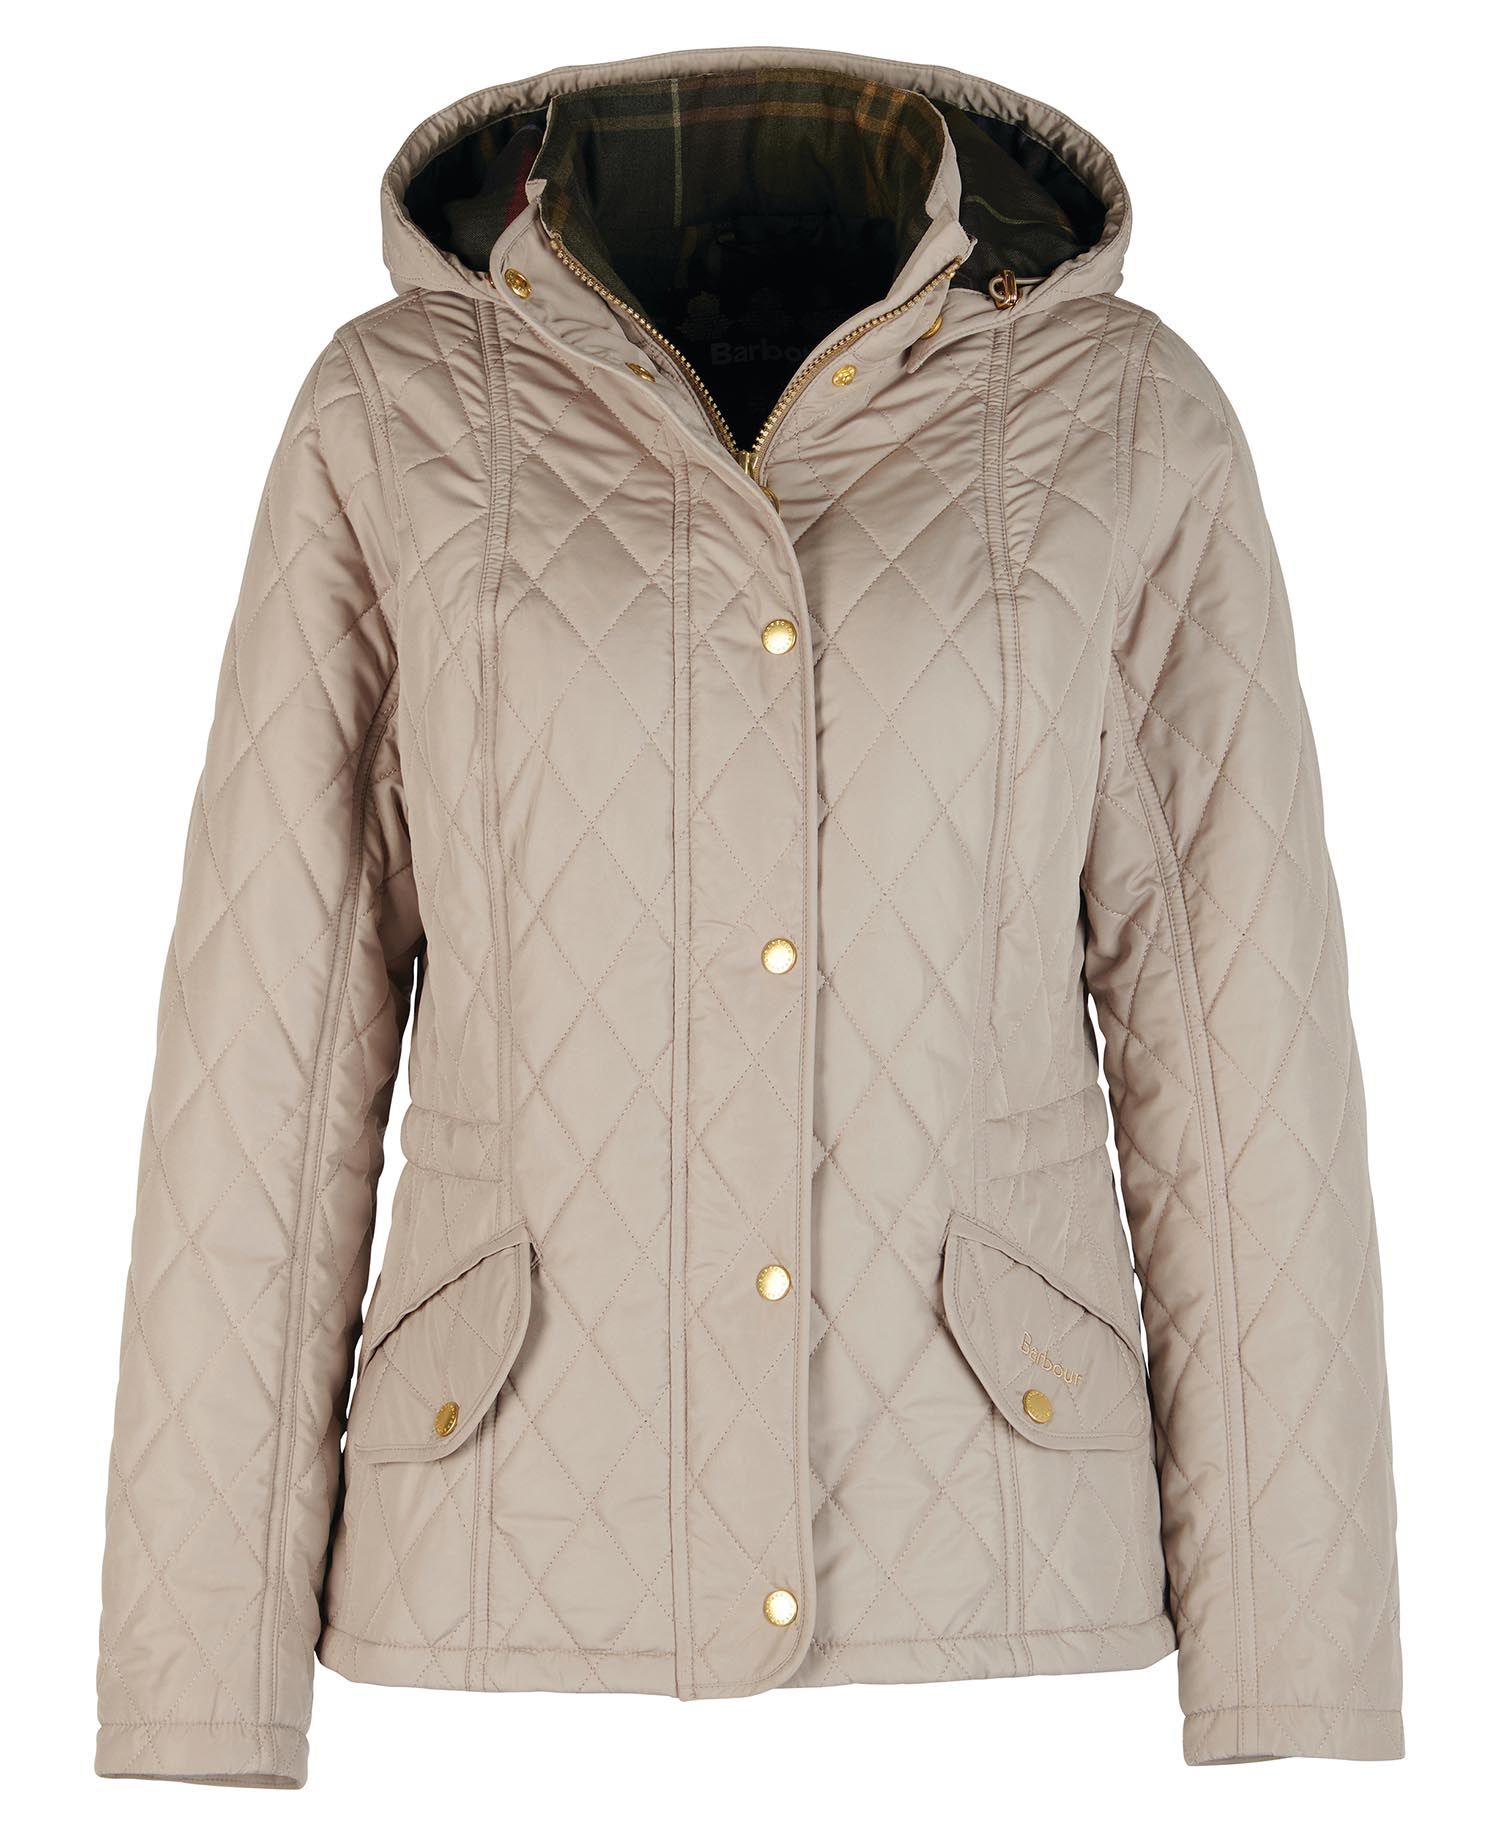 The Perfect Winter Coat | Barbour